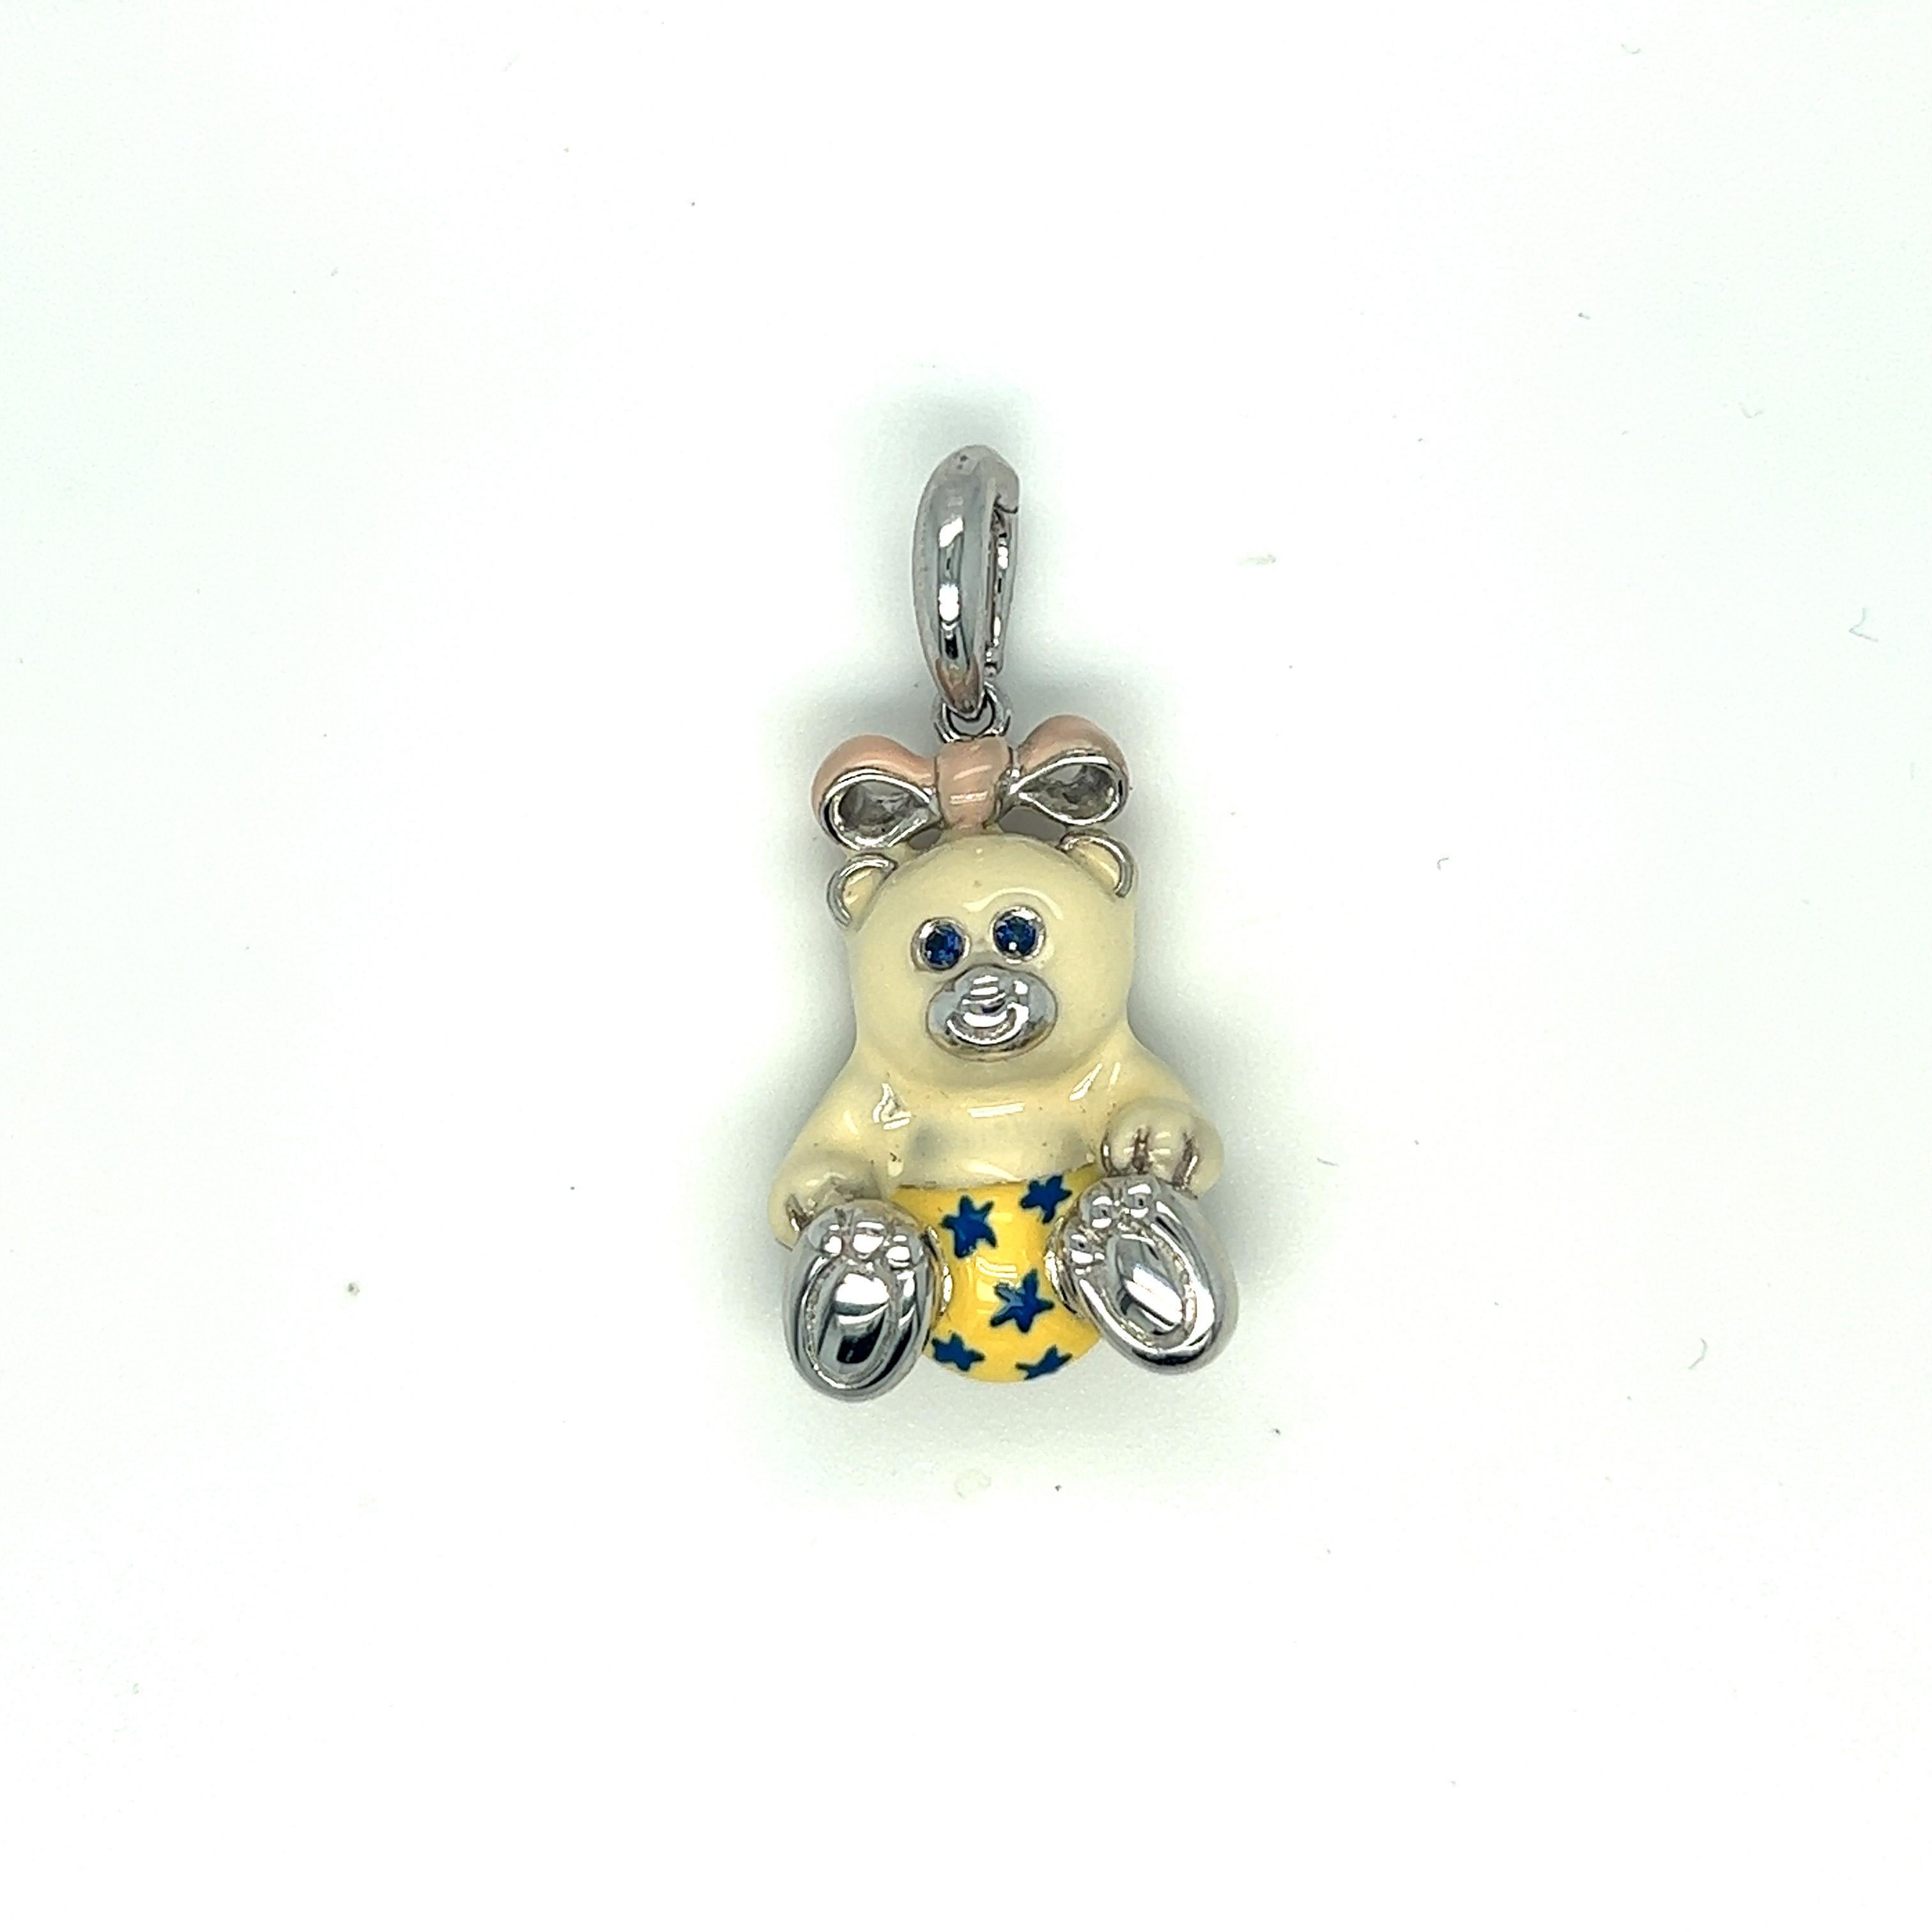 Just the cutest....Teddy bear charm made exclusively for Cellini by Ambrosi of Italy.

This 18 karat white gold teddy bear charm is crafted with a soft white enamel for the body. Her outfit is yellow with blue stars.. She has a pink bow and blue